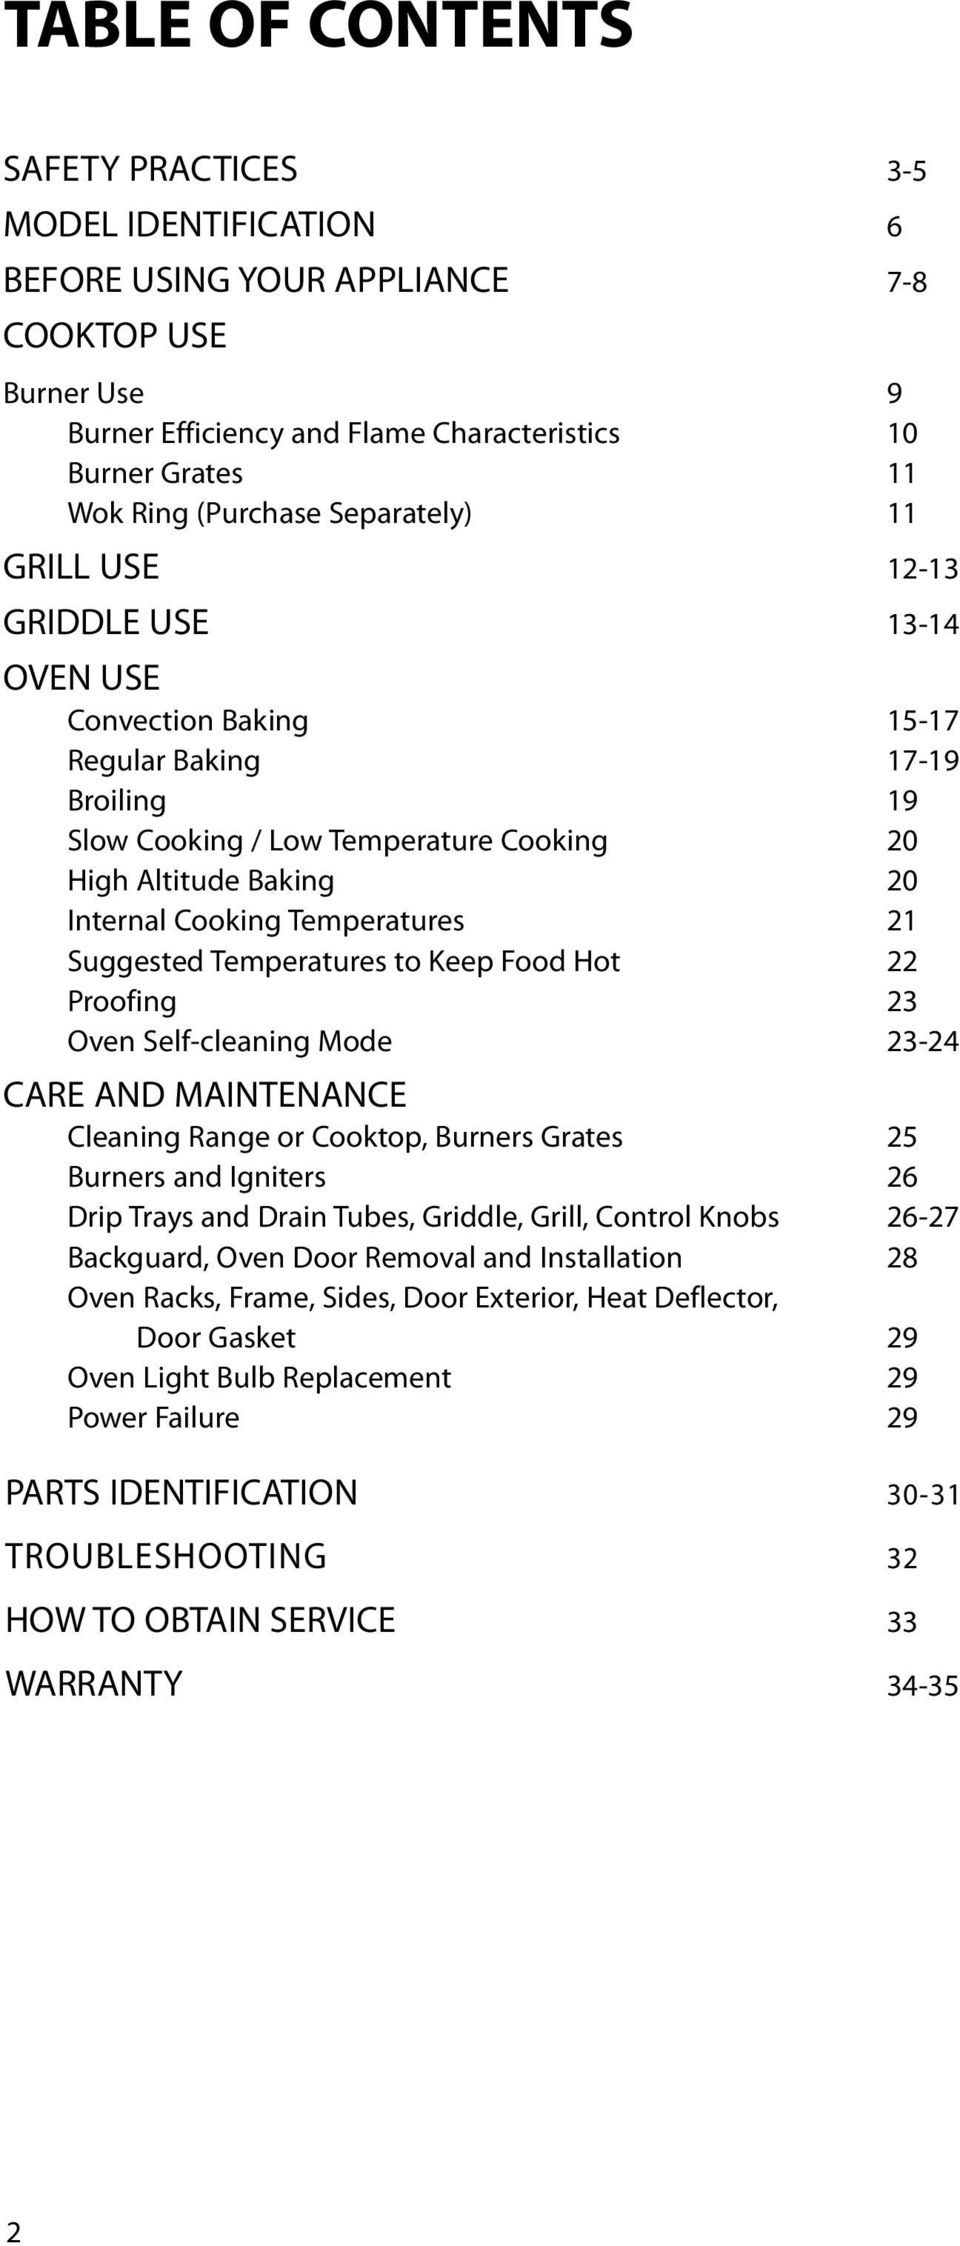 Cooking Temperatures 21 Suggested Temperatures to Keep Food Hot 22 Proofing 23 Oven Self-cleaning Mode 23-24 CARE AND MAINTENANCE Cleaning Range or Cooktop, Burners Grates 25 Burners and Igniters 26